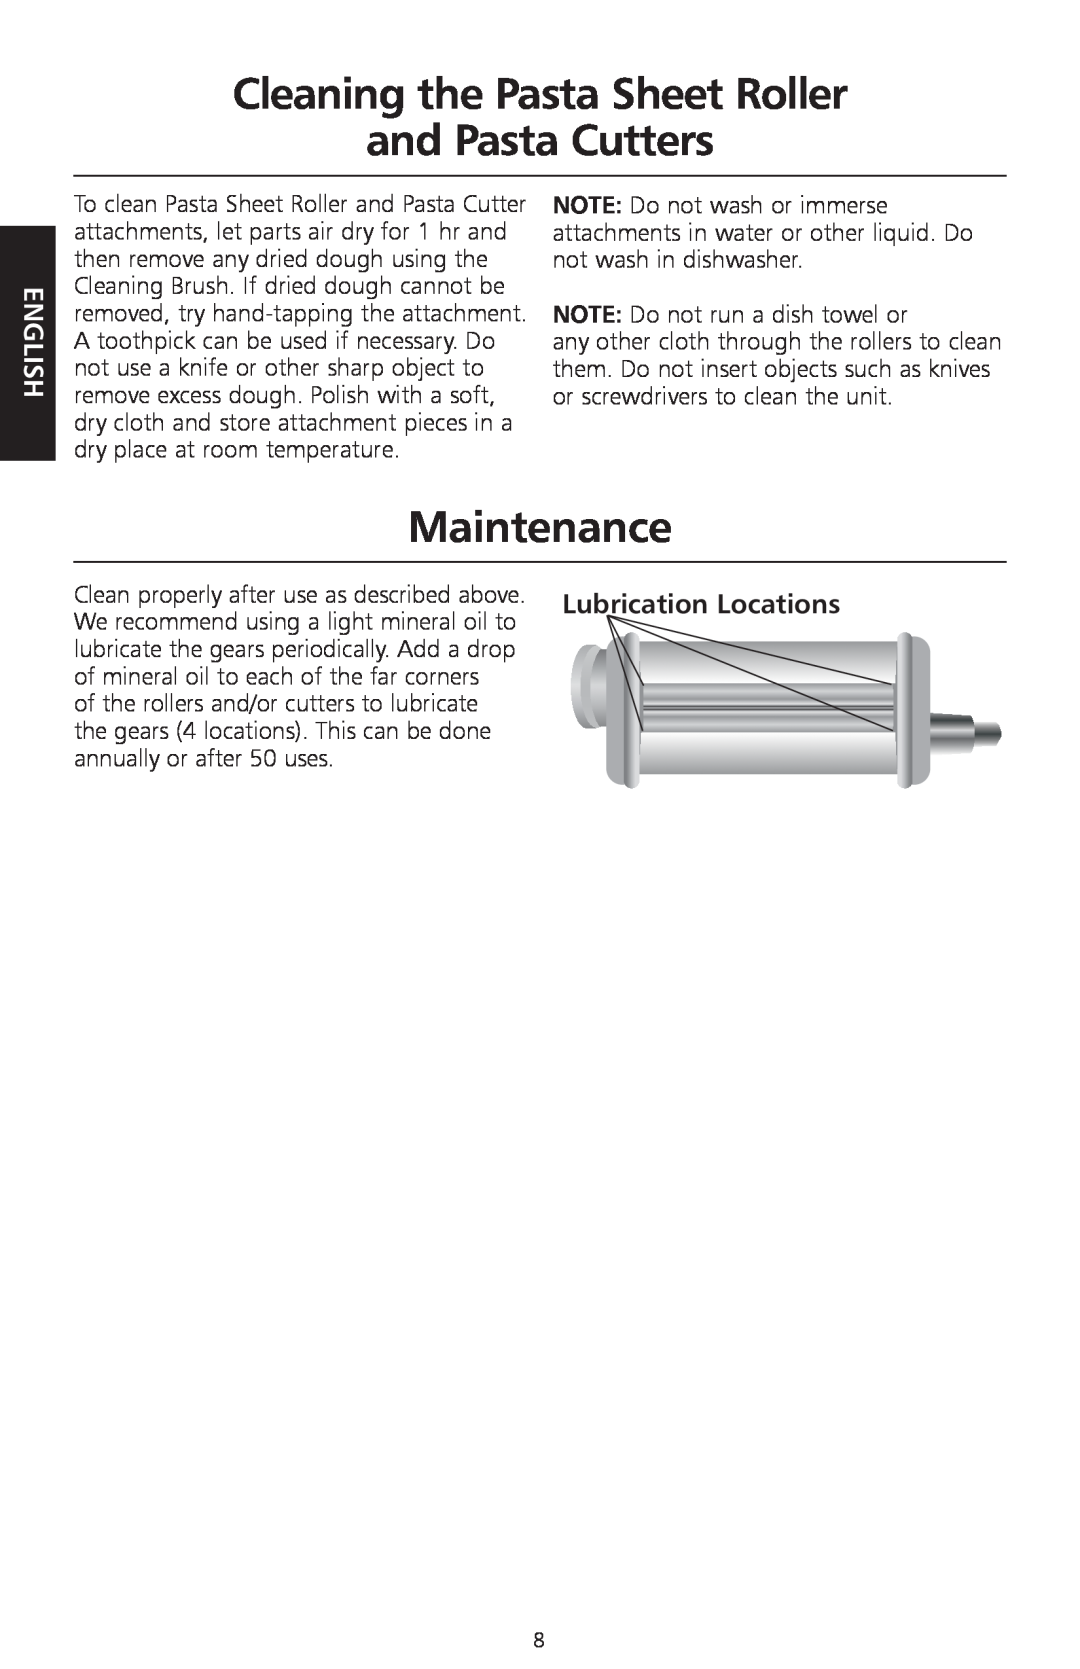 KitchenAid KPEX manual Cleaning the Pasta Sheet Roller and Pasta Cutters, Maintenance, English 